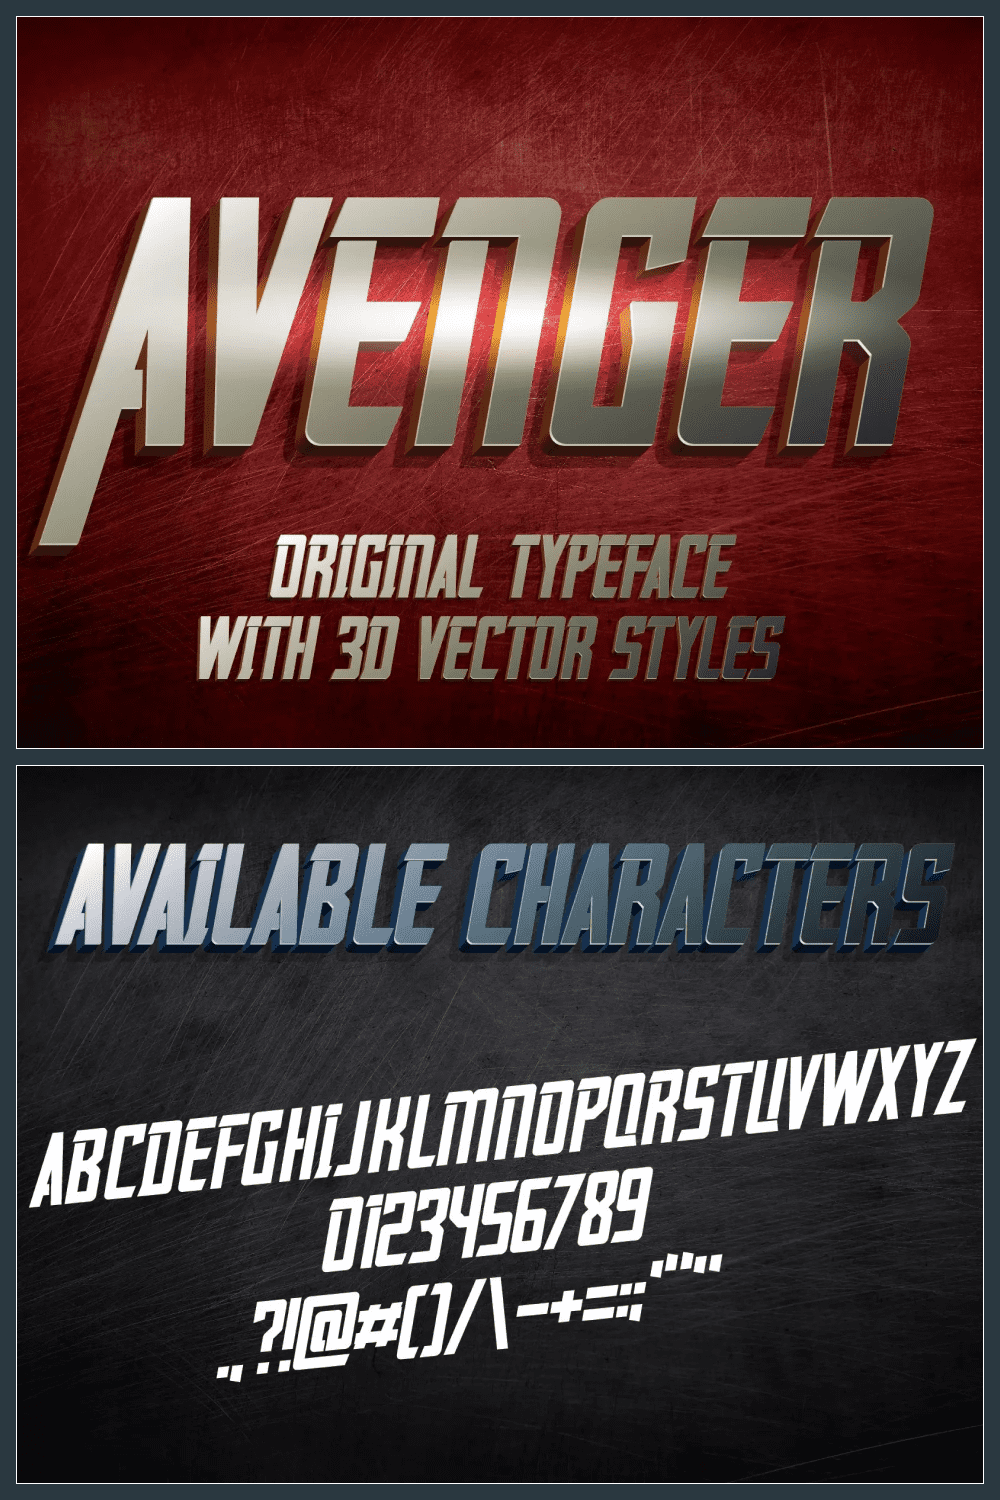 Letters in the style of the Avengers on a red and dark background.